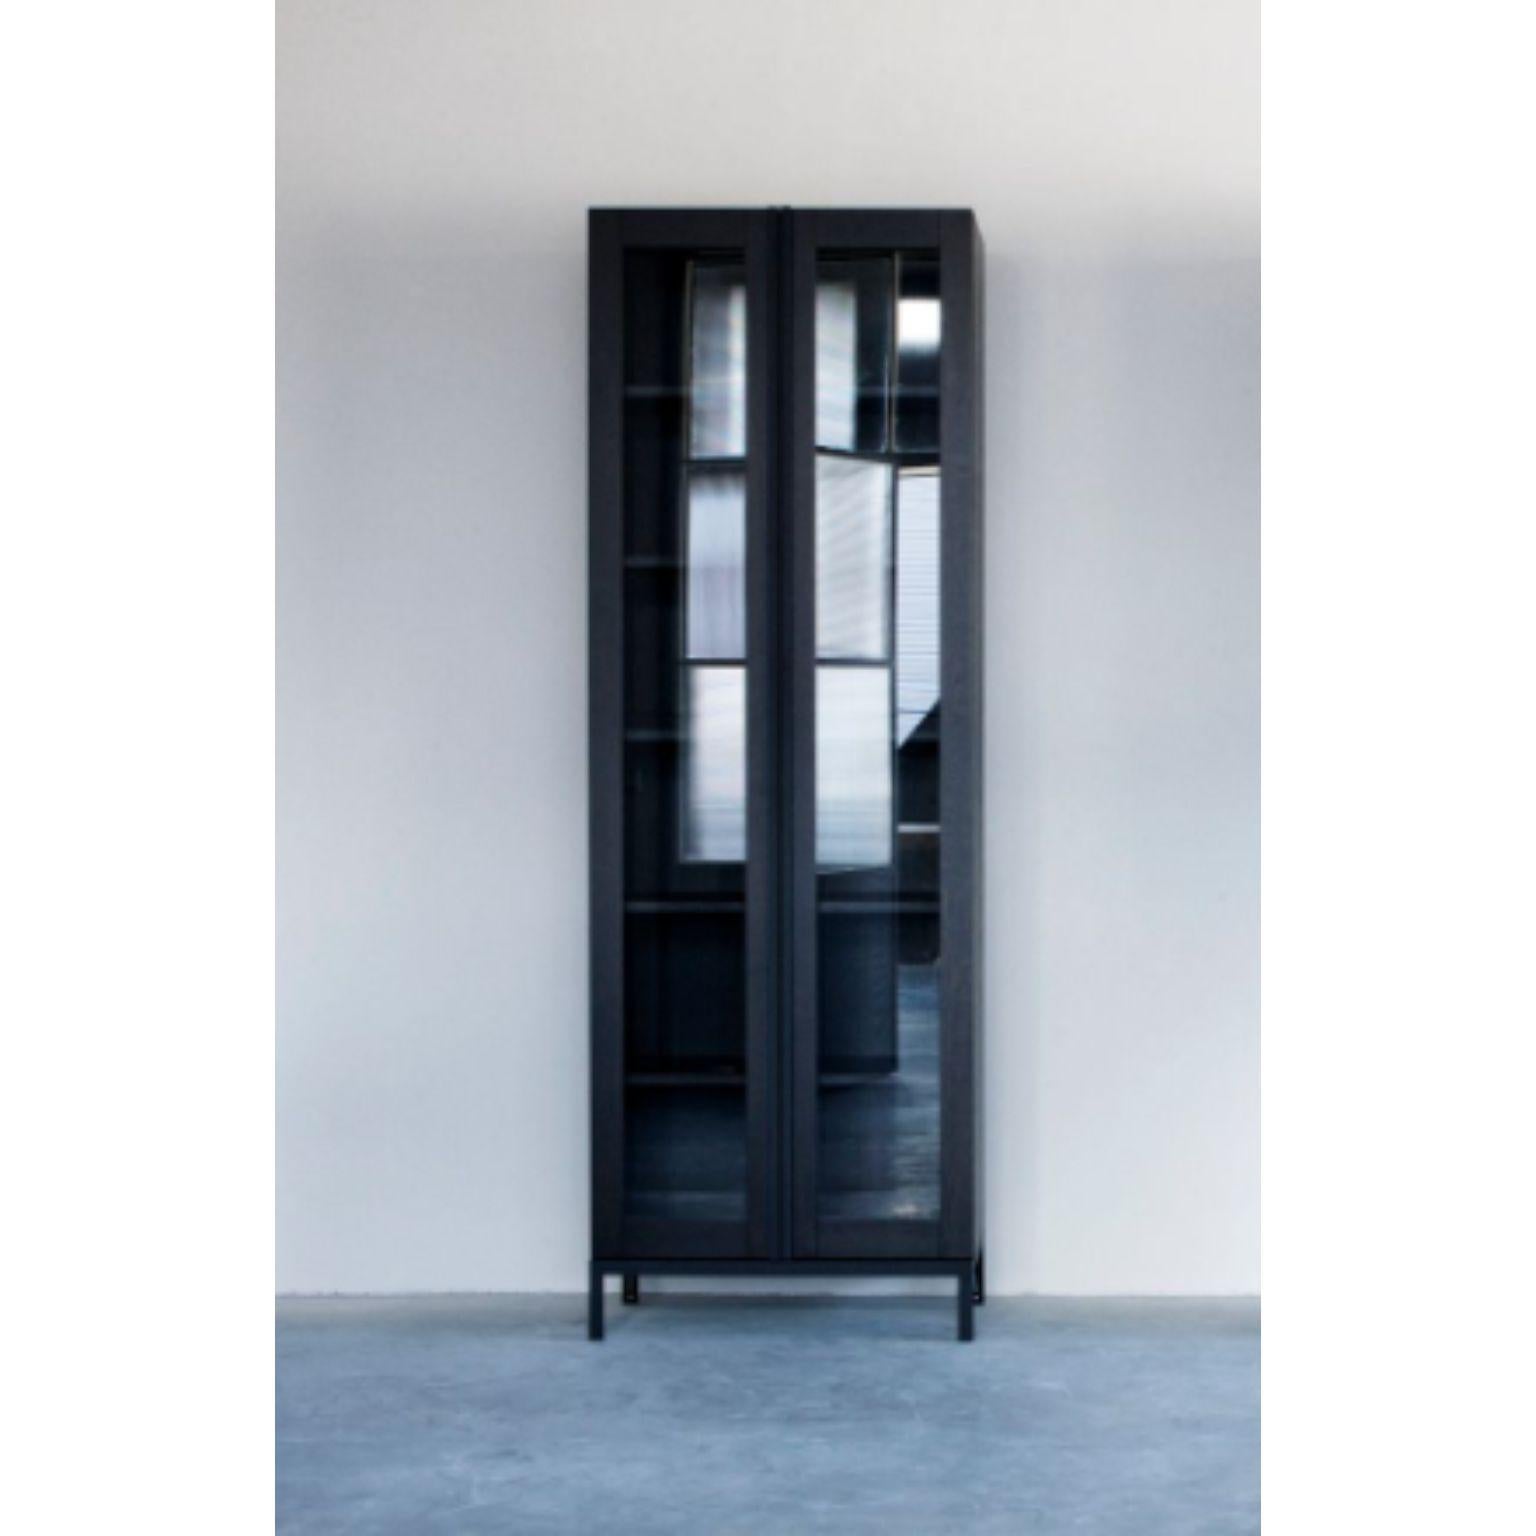 Greep cabinet with glass doors by Van Rossum
Dimensions: D76 x W41 x H226 cm
Materials: Oak, steel, glass.

The wood is available in all standard Van Rossum colors, or in a matching finish to customer’s own sample.
The steel frames are